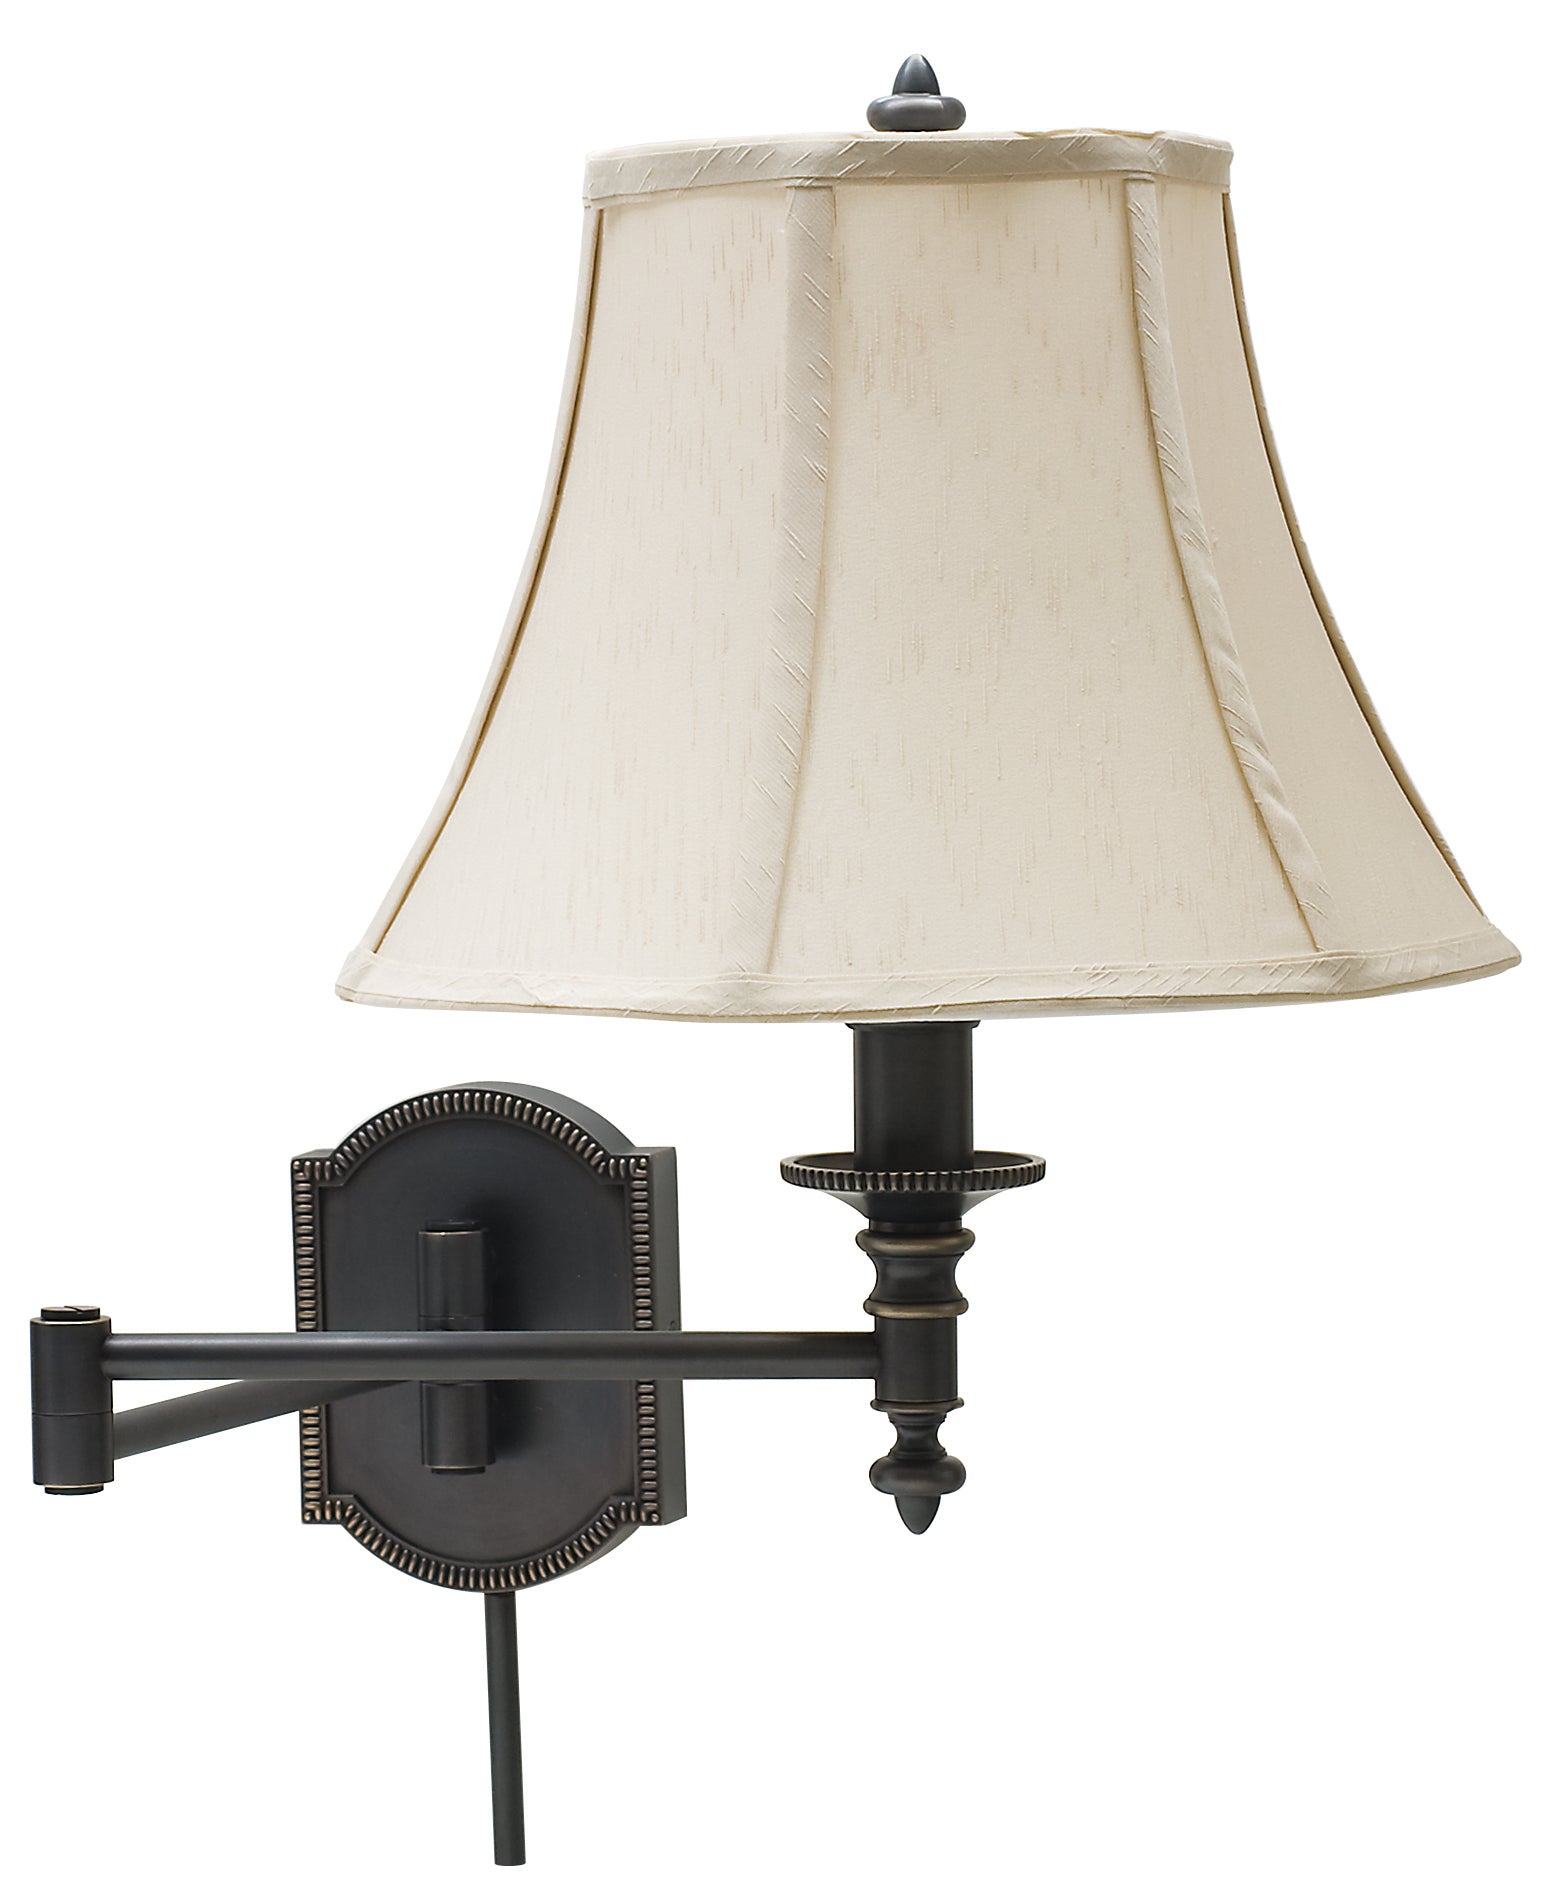 House of Troy Wall Swing Arm Lamp in Oil Rubbed Bronze WS761-OB